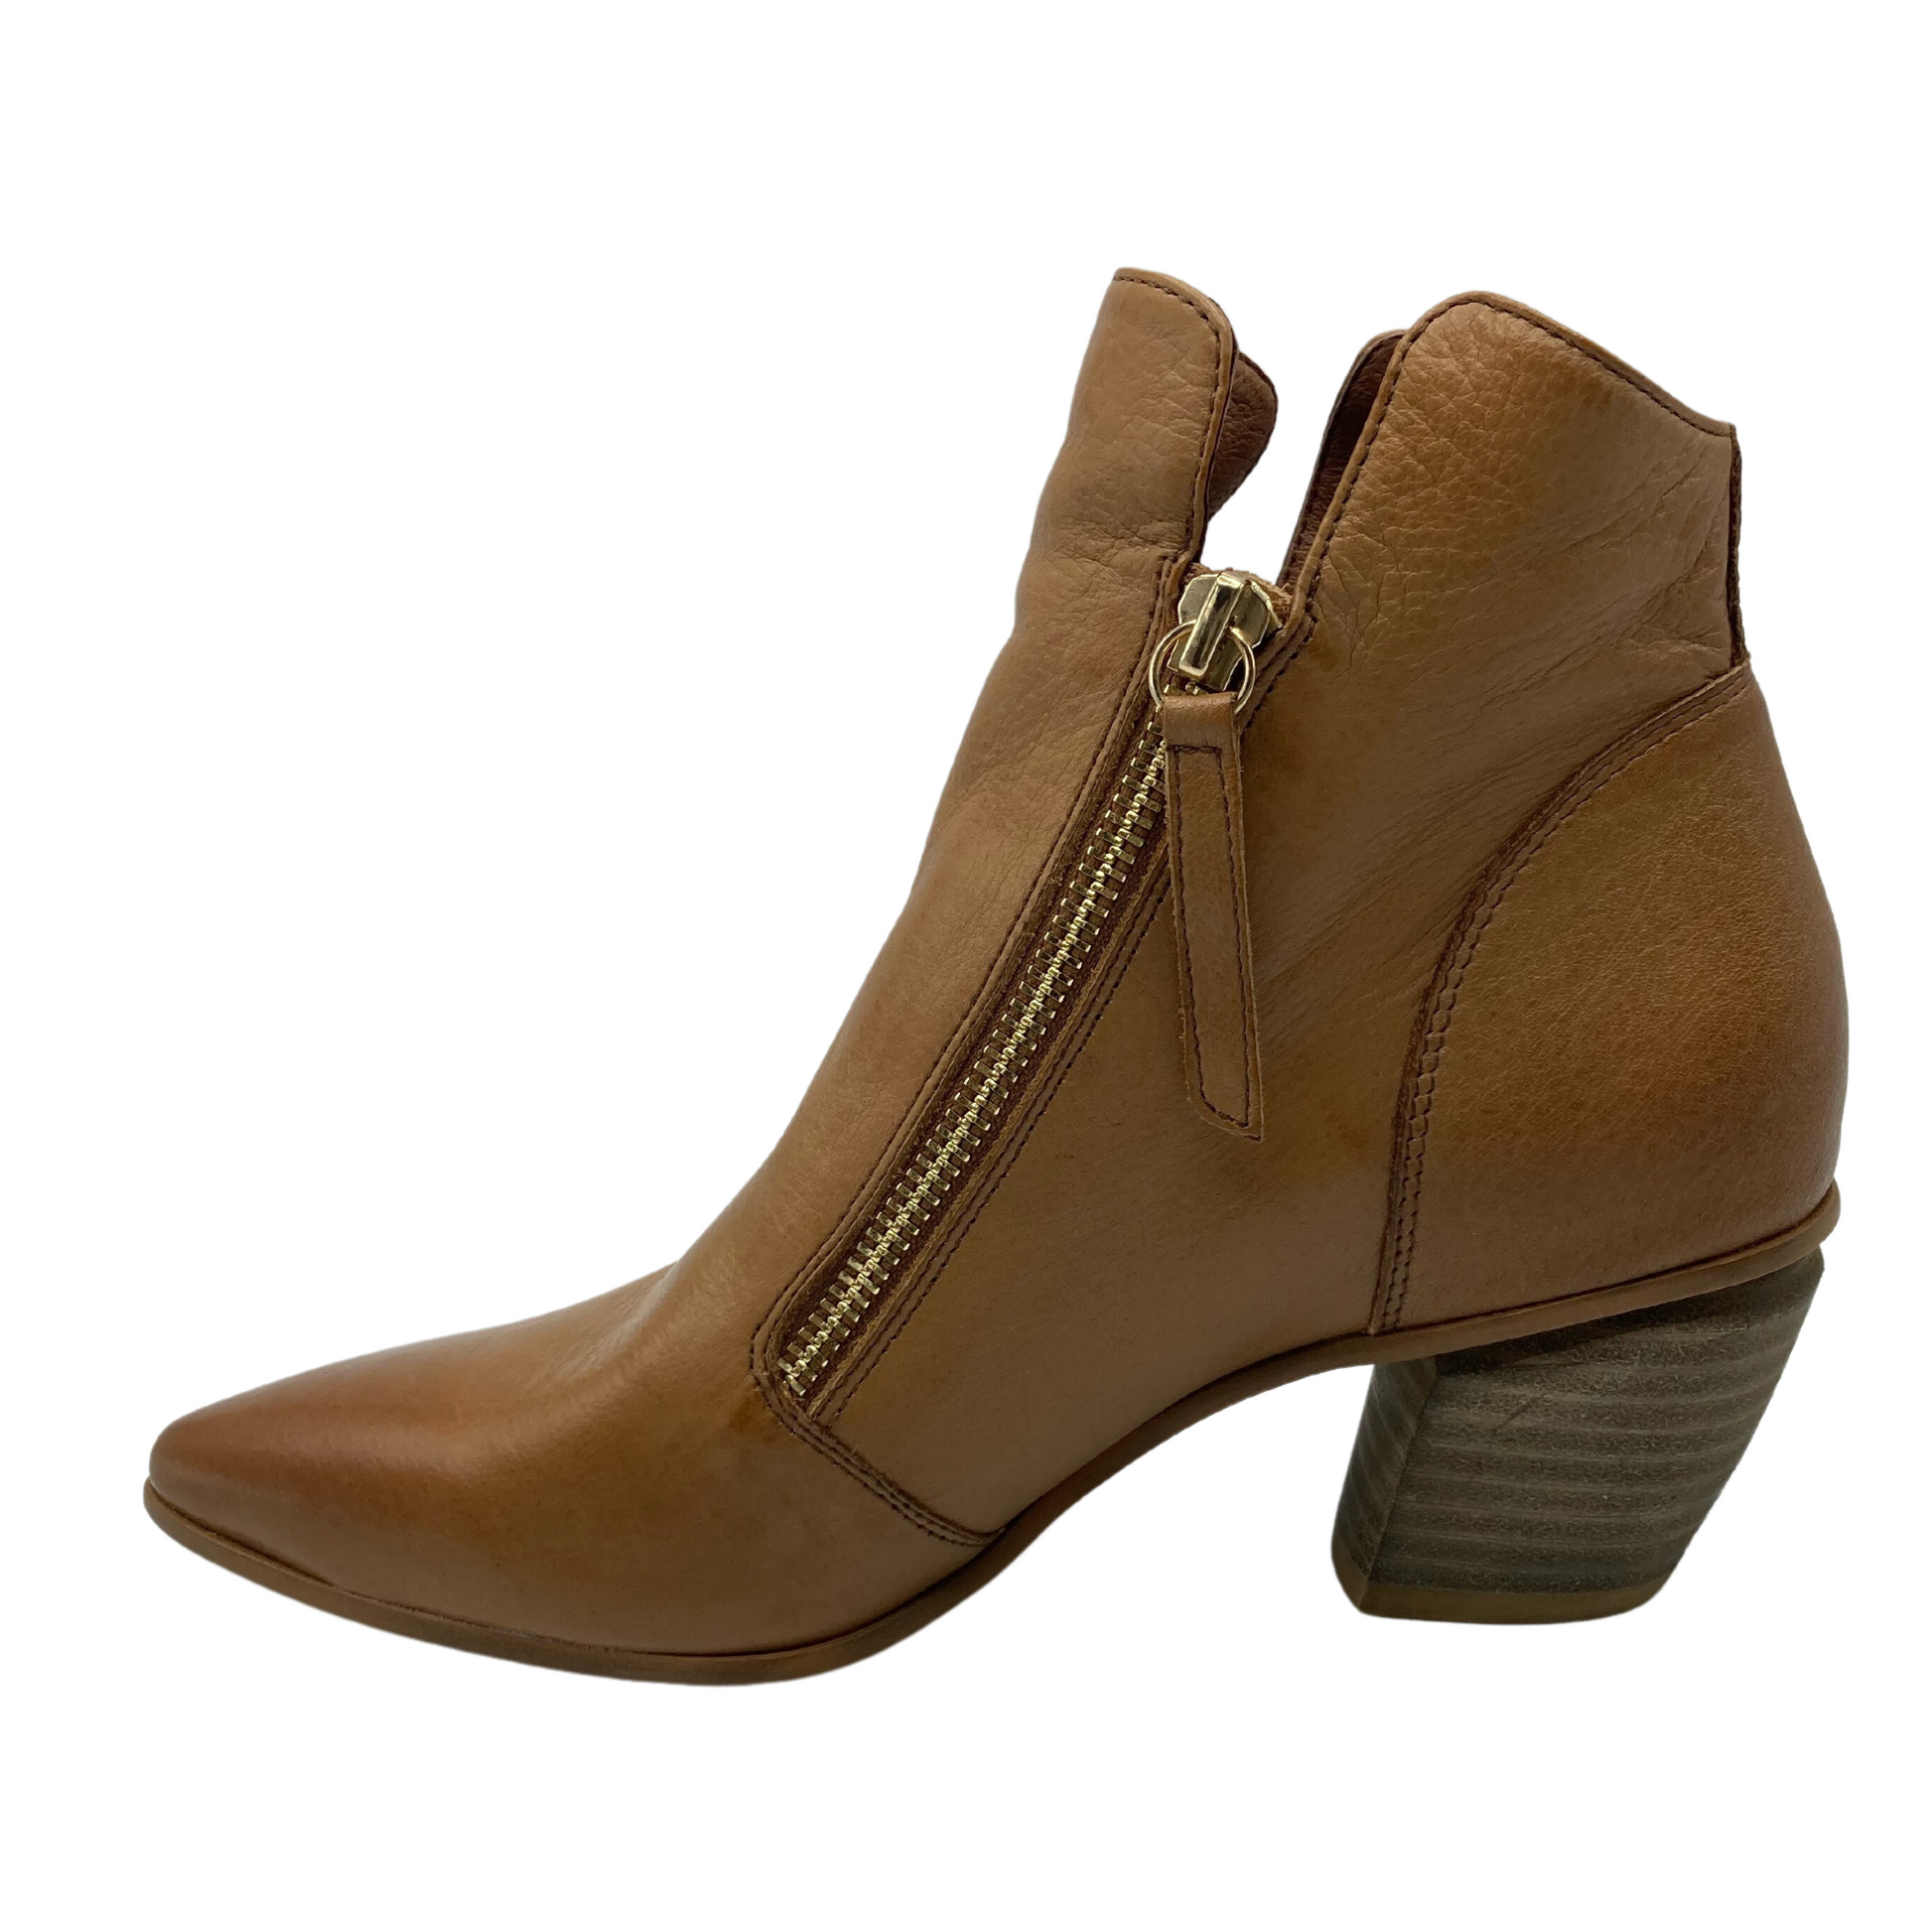 Left facing profile view of cowboy-style short leather boot with pointy toe and chunky heel